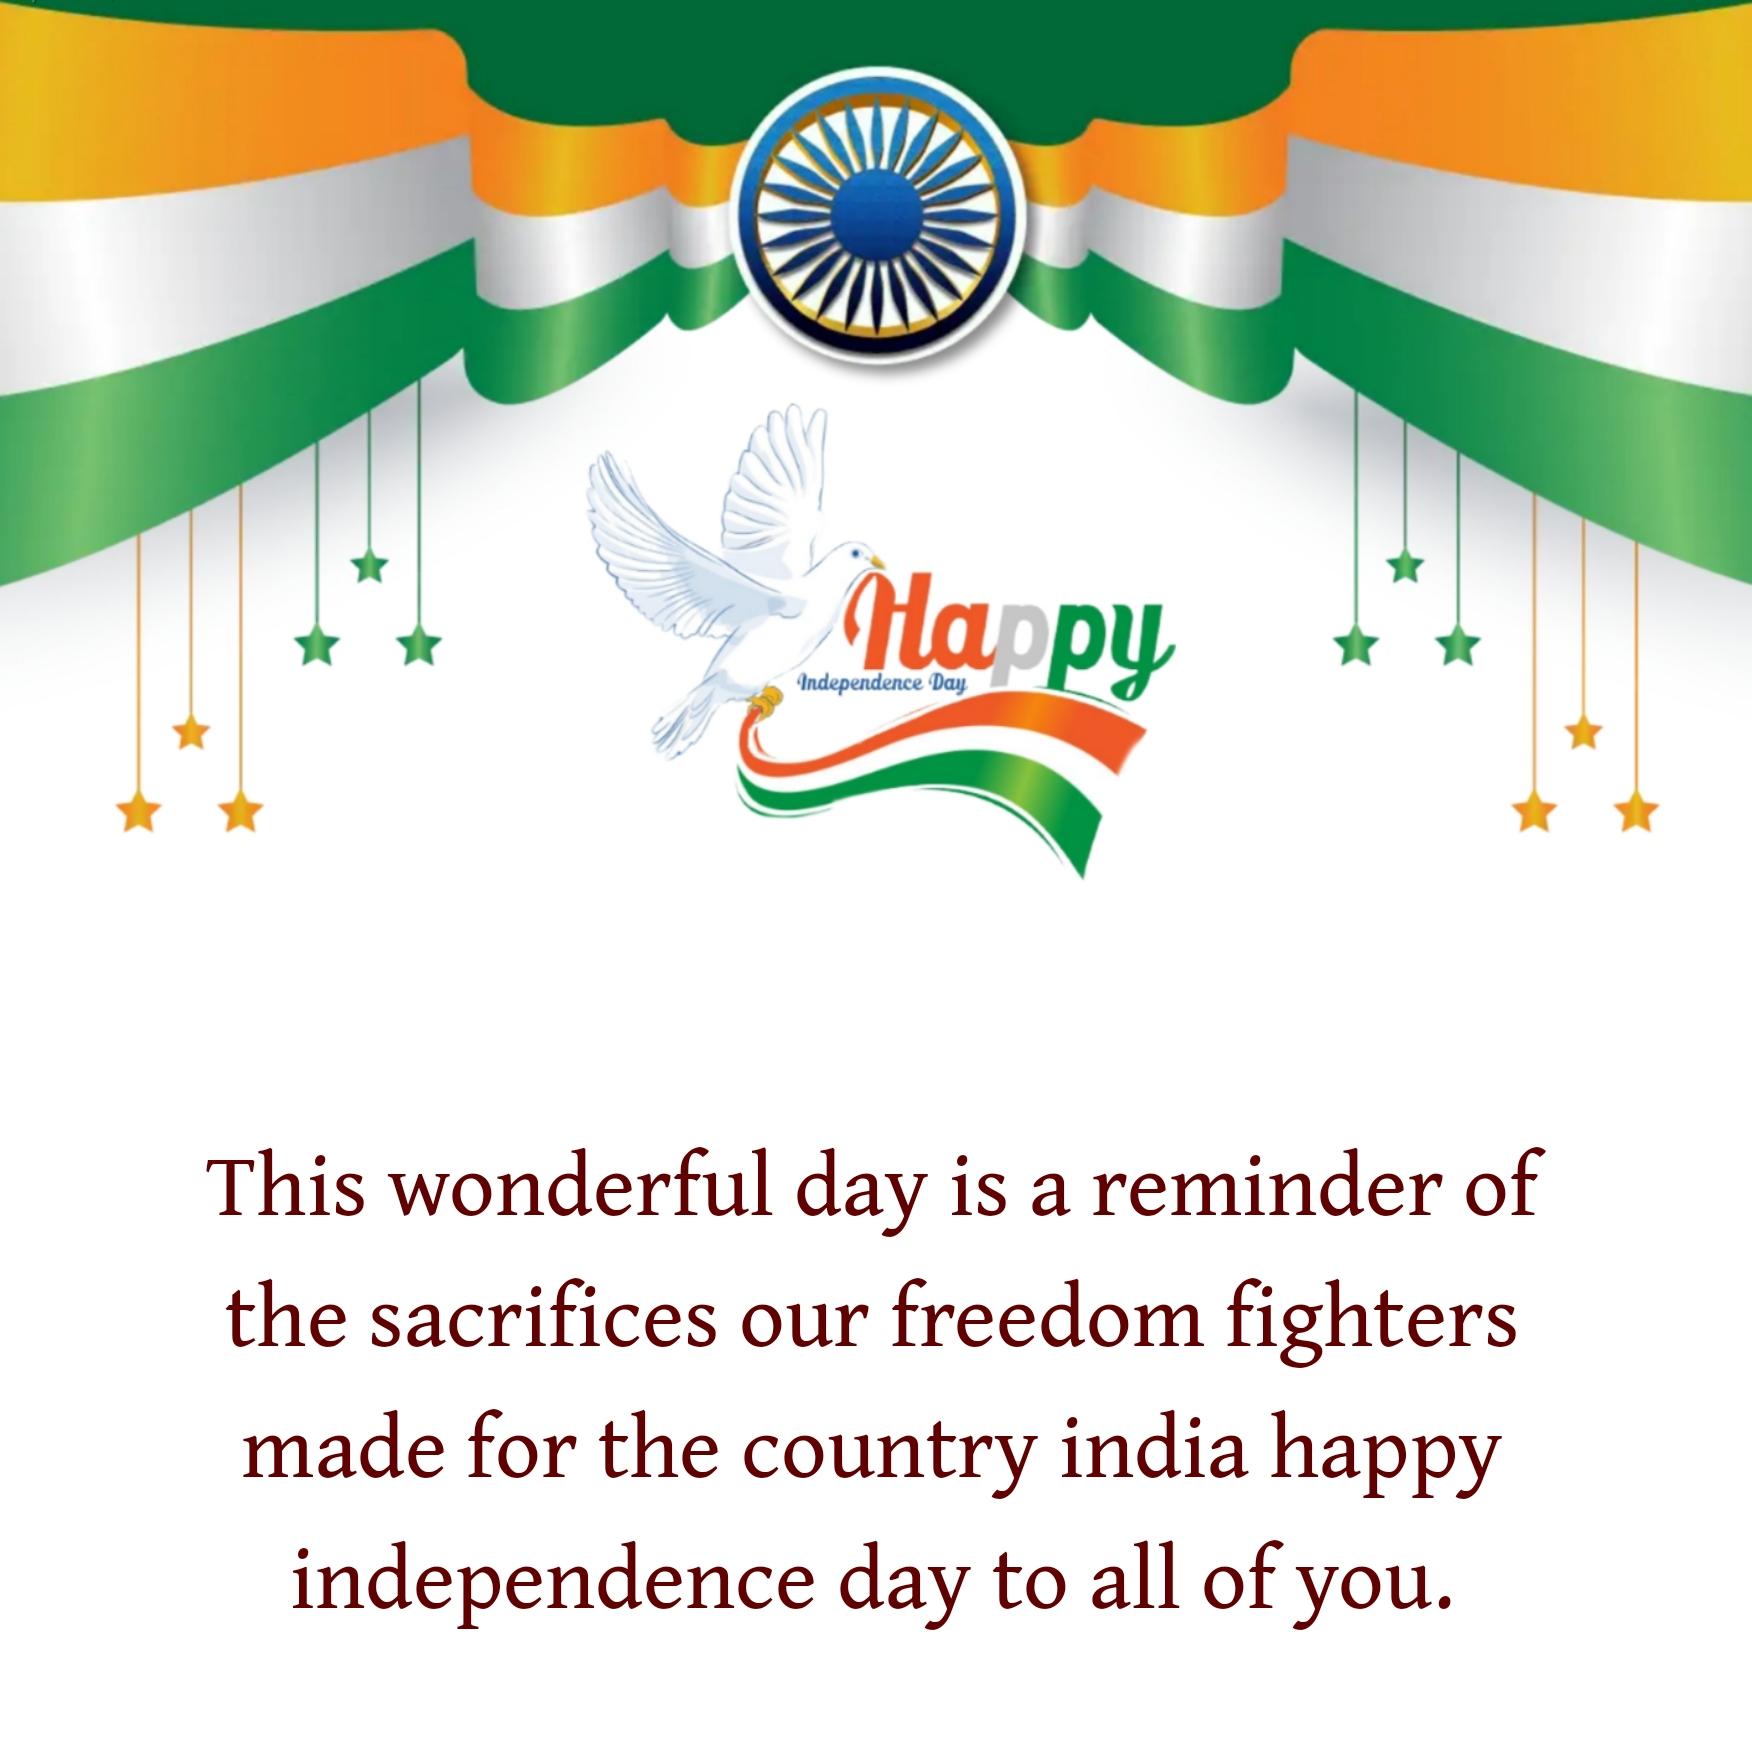 This wonderful day is a reminder of the sacrifices our freedom fighters